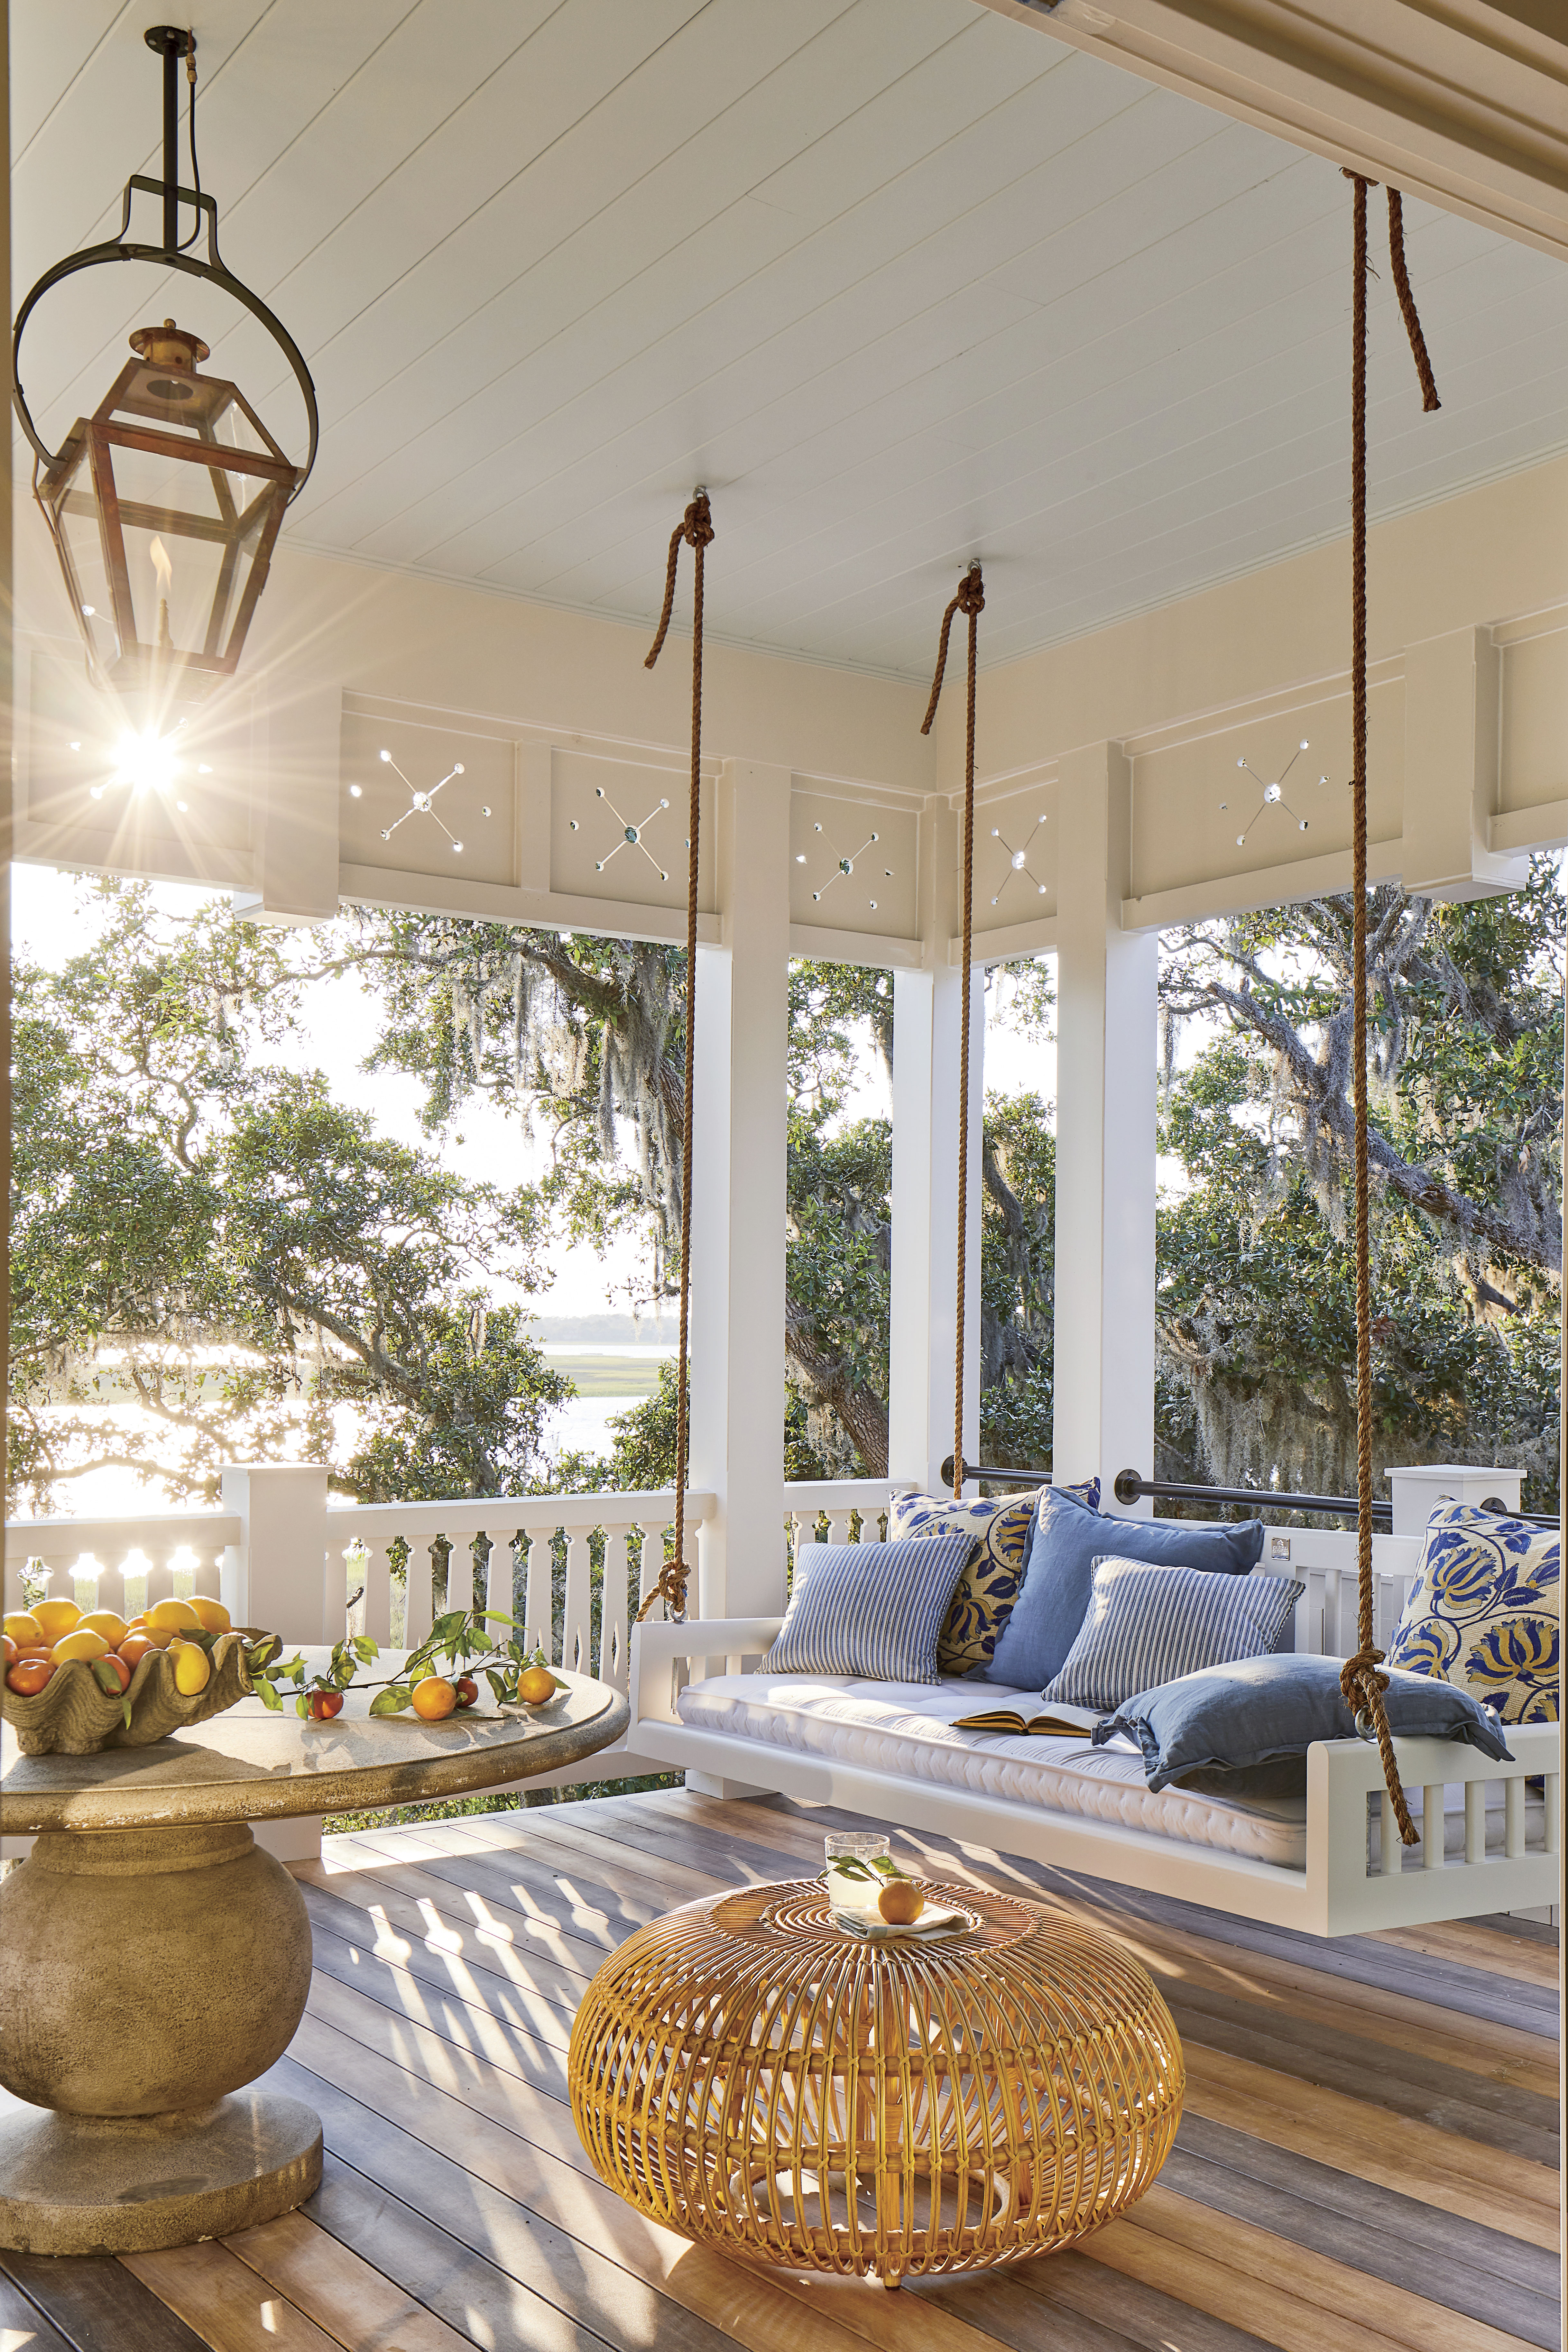 2019 Southern Living Idea House Built By Riverside - Southern Living House - HD Wallpaper 